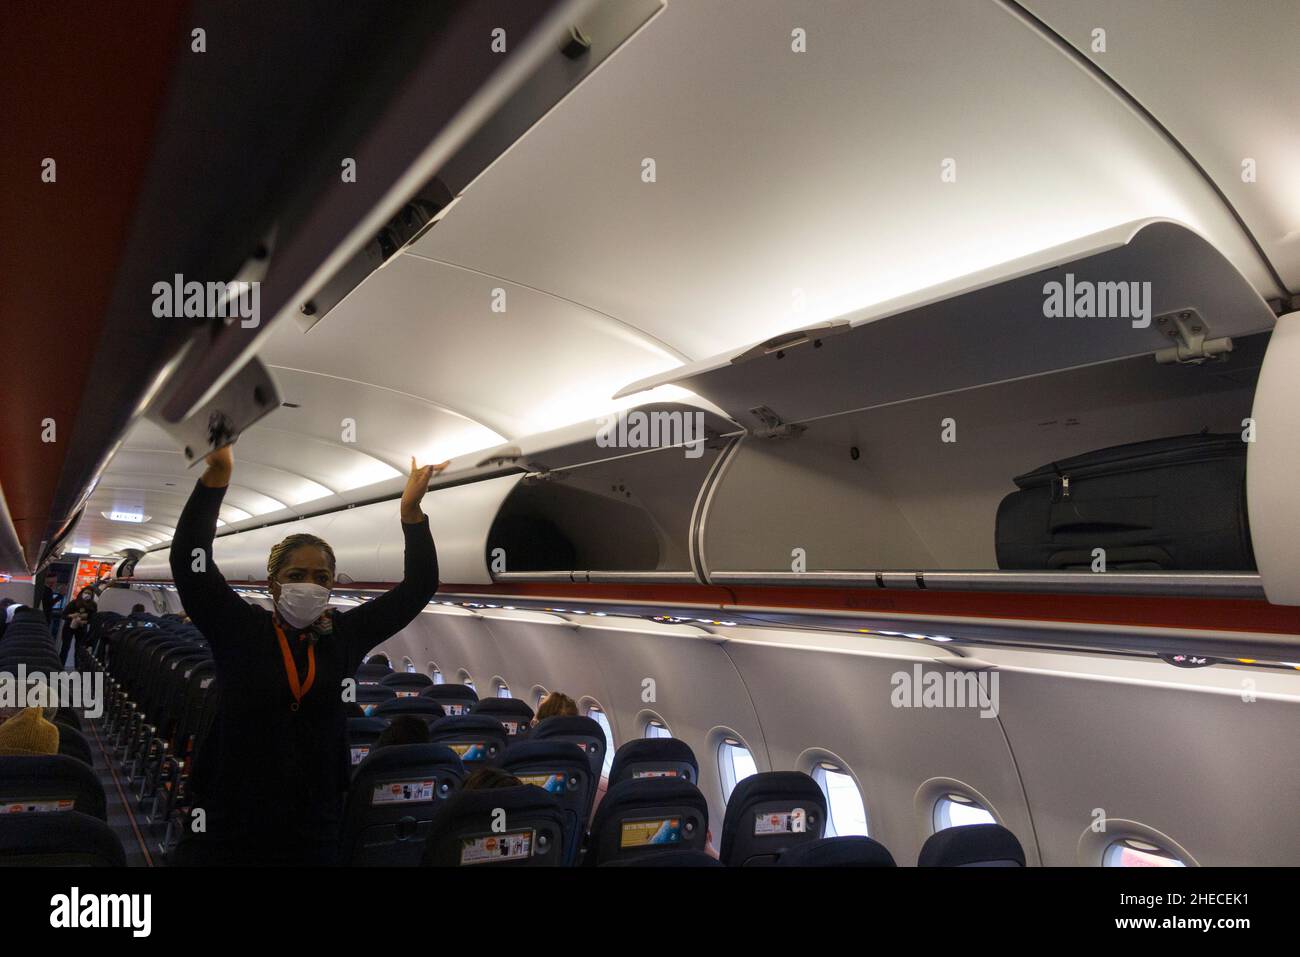 Member of cabin crew closing the doors on overhead passenger locker / lockers / compartment / compartments for stowing passengers bags cabin luggage, on an Easyjet Airbus A320 or A319 plane.  (128) Stock Photo